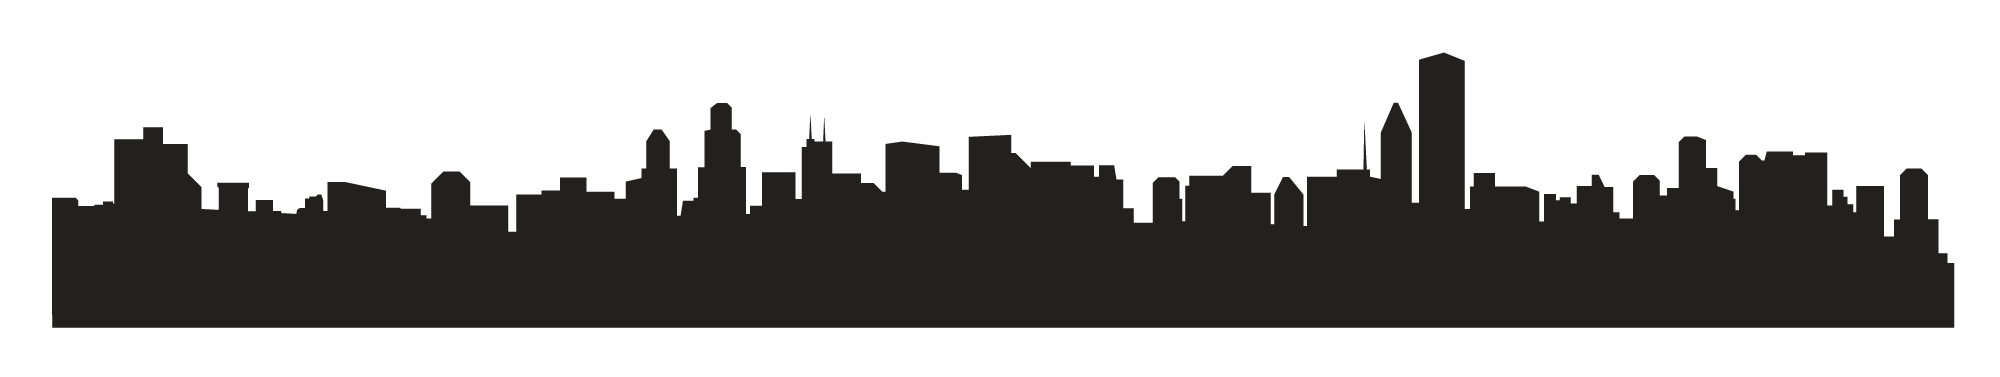 Cityscape Silhouette Png - ClipArt Best